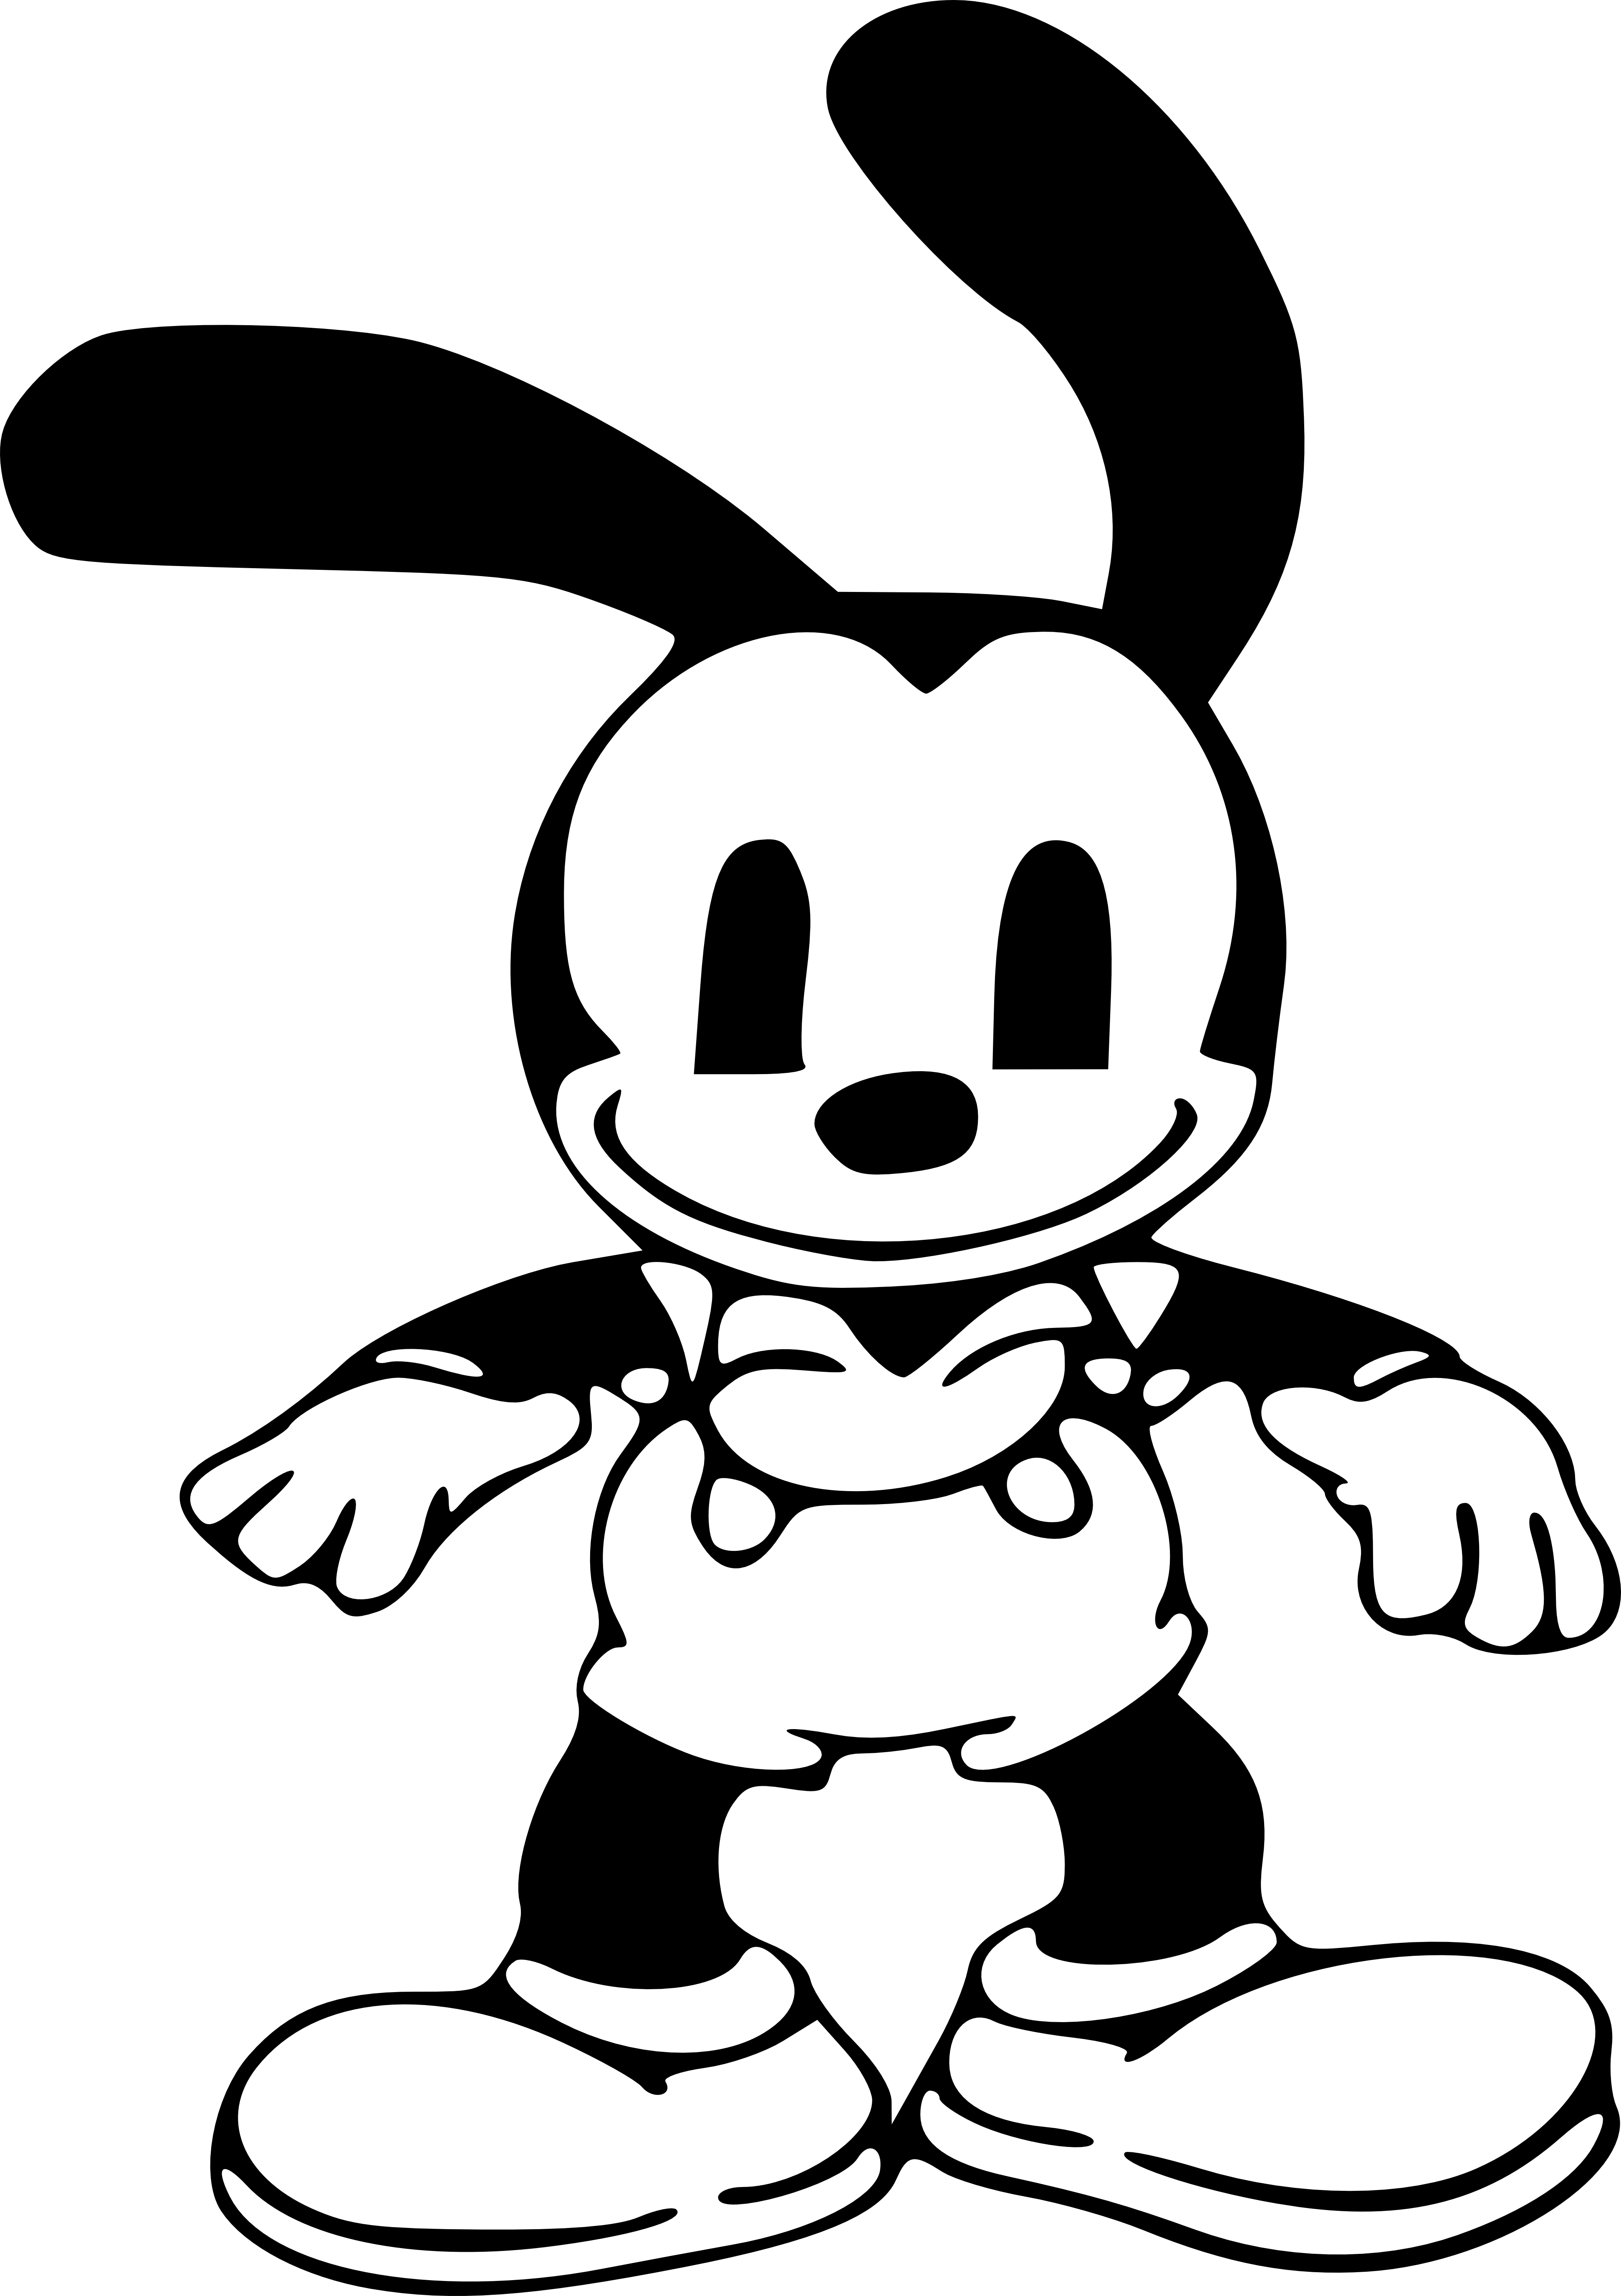 Oswald the Lucky Rabbit PNG Plansparent Image